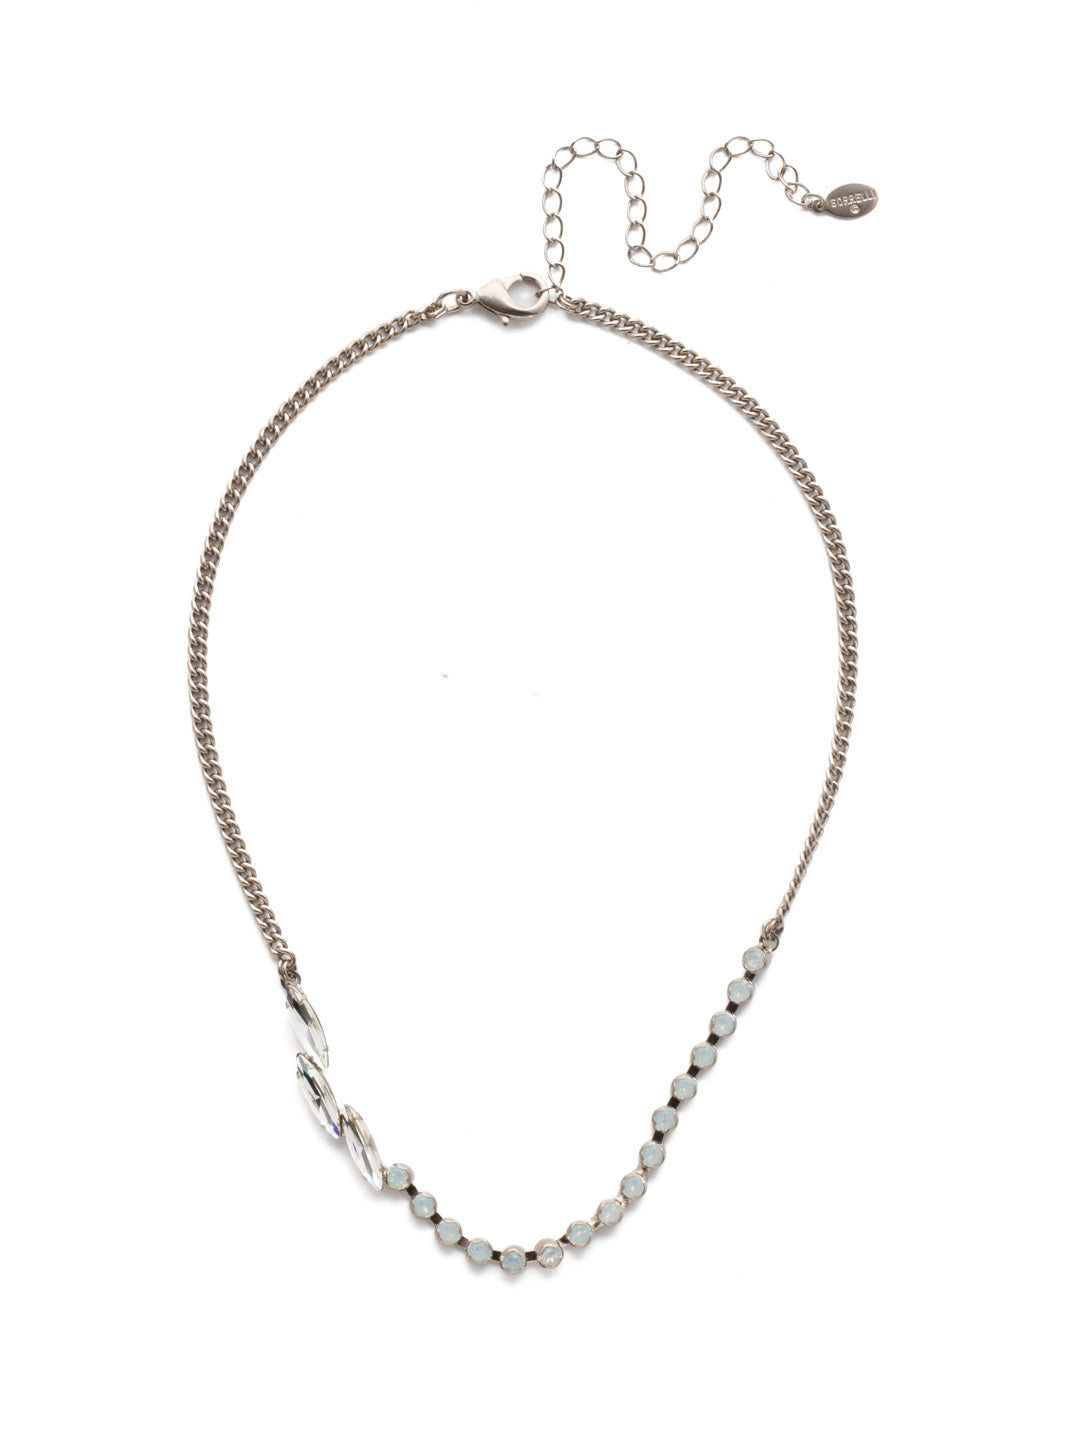 Isabella Classic Necklace - NEF46ASGLC - Multicolored crystals sparkle on this box chain necklace which can make an elegant addition to any look. Complete with a lobster claw clasp making it easily adjustable to fit your desired neckline. From Sorrelli's Glacier collection in our Antique Silver-tone finish.